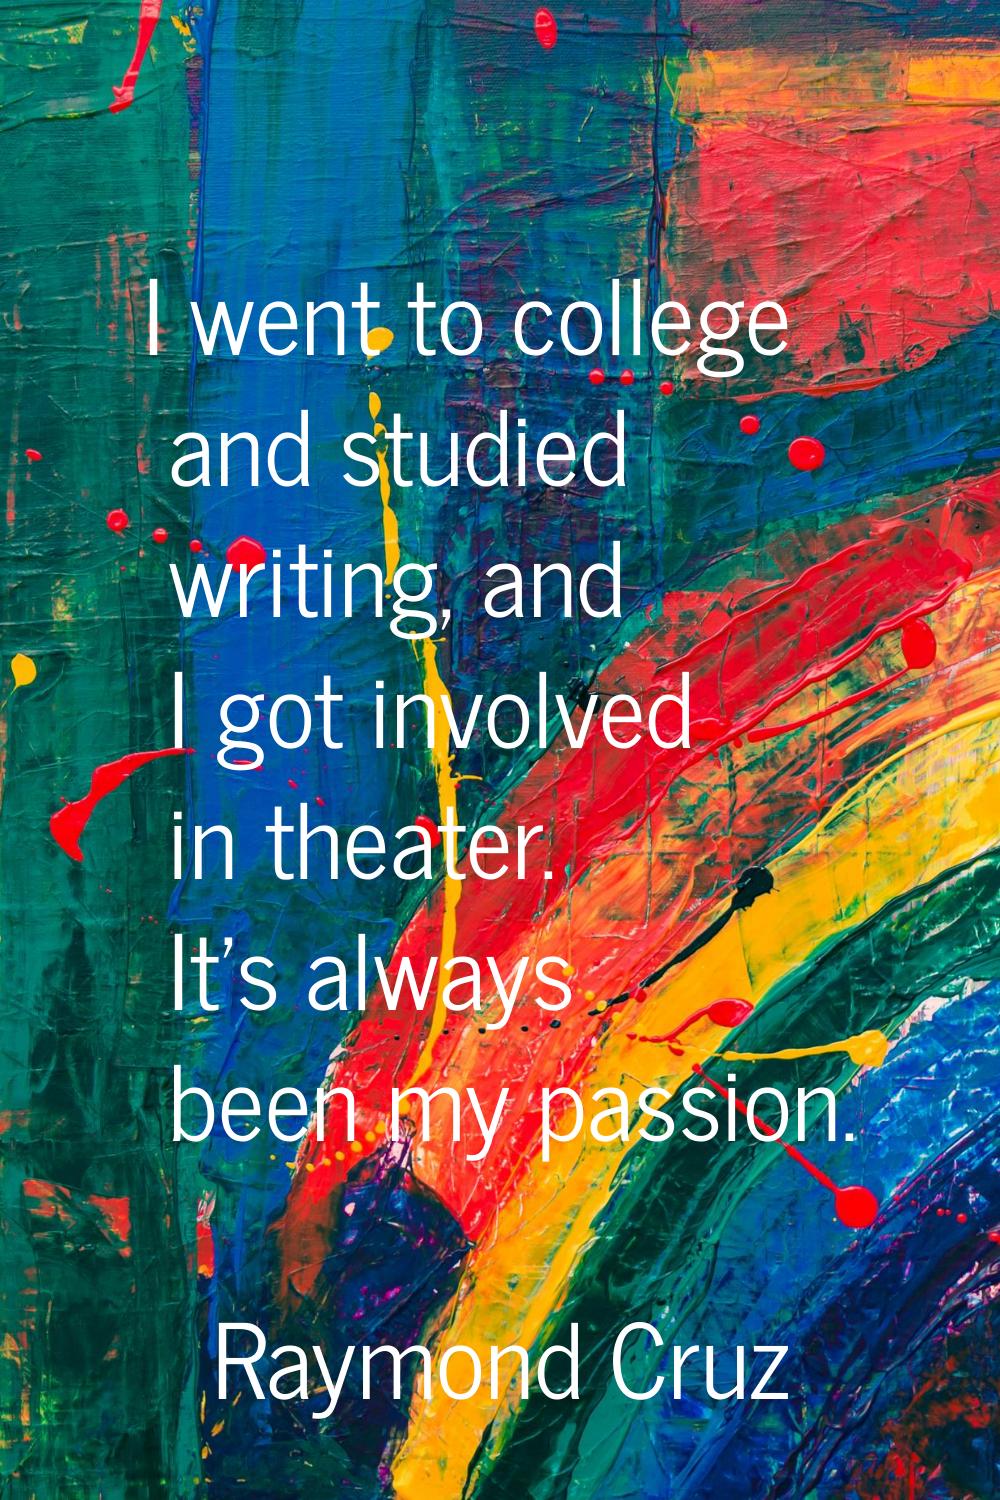 I went to college and studied writing, and I got involved in theater. It's always been my passion.